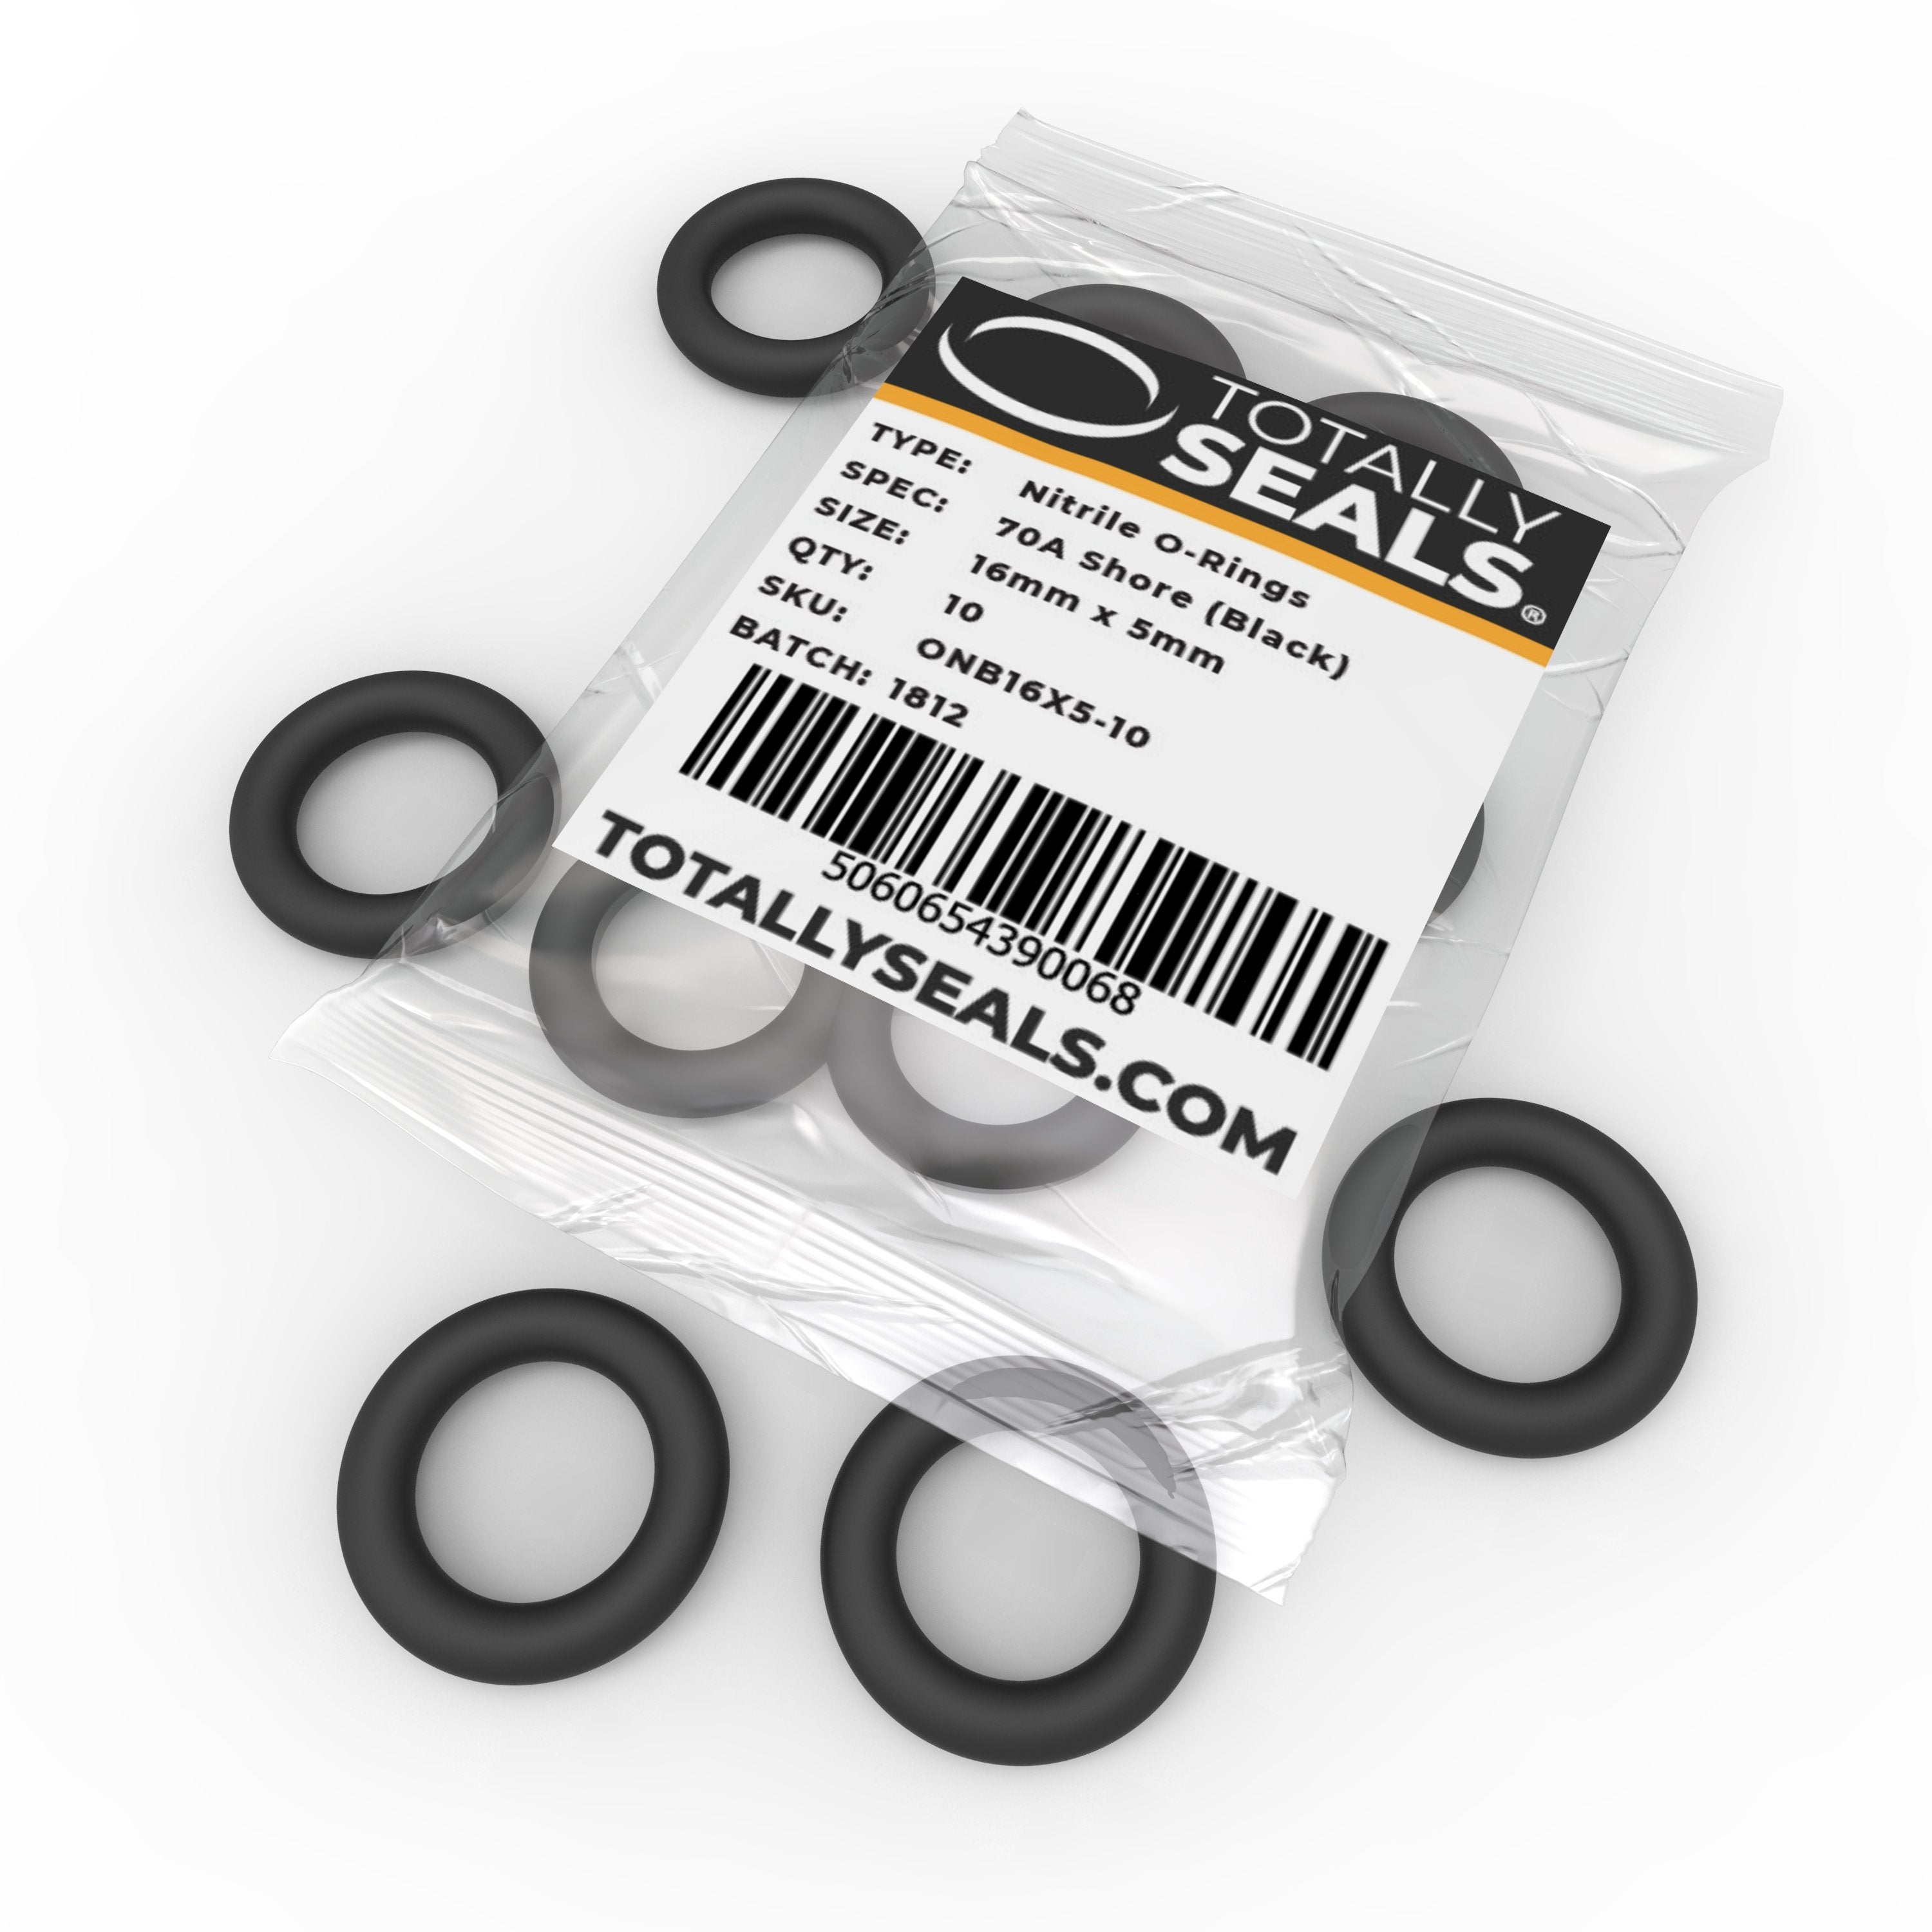 16mm x 5mm (26mm OD) Nitrile O-Rings – Totally Seals